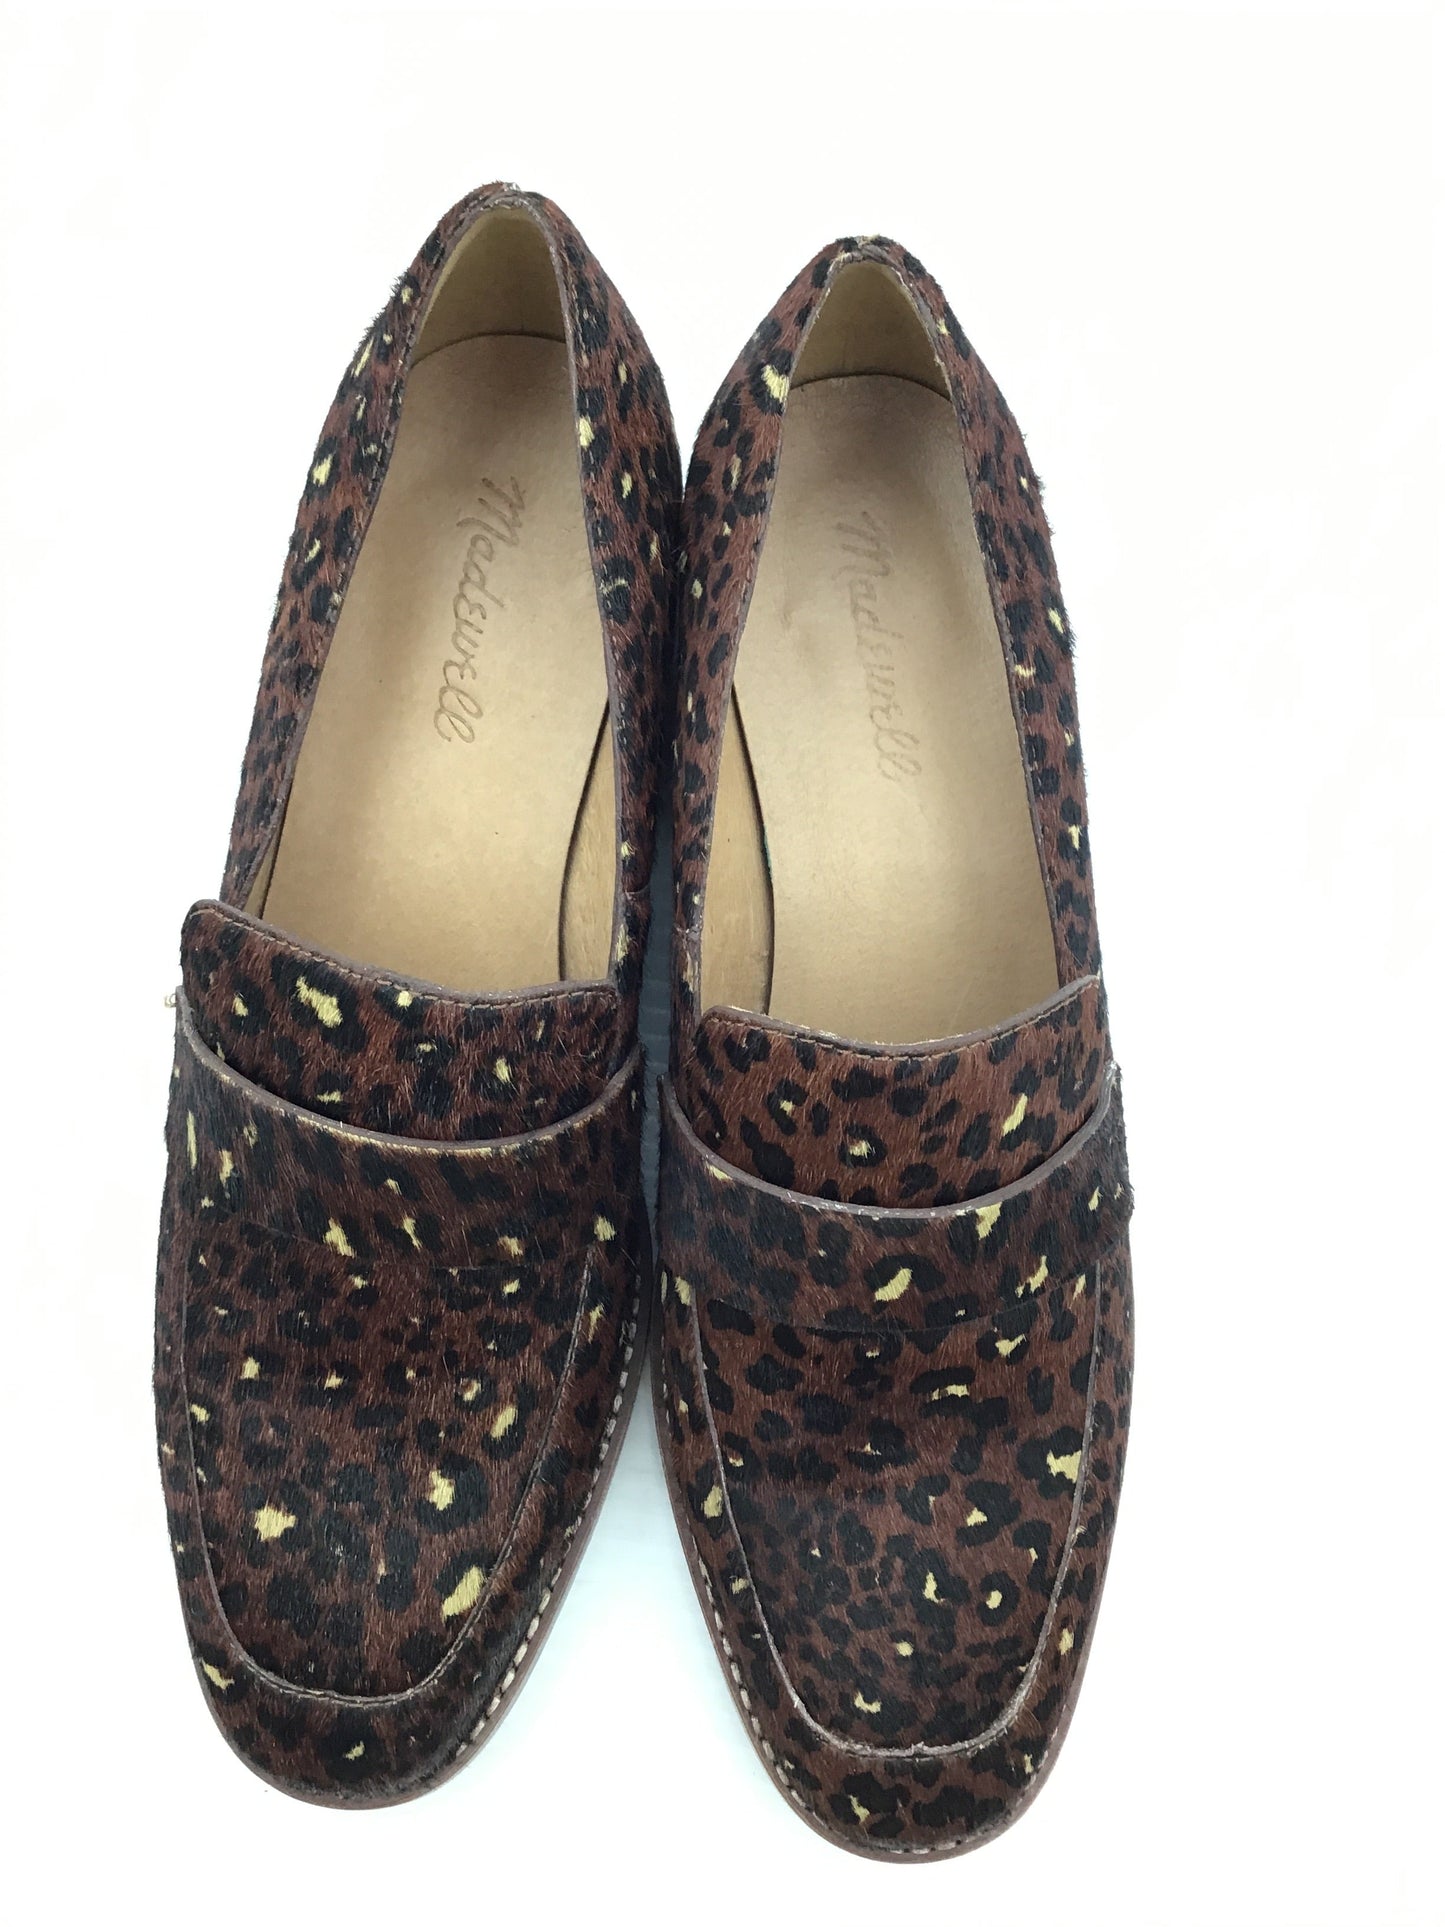 Shoes Flats Loafer Oxford By Madewell  Size: 9